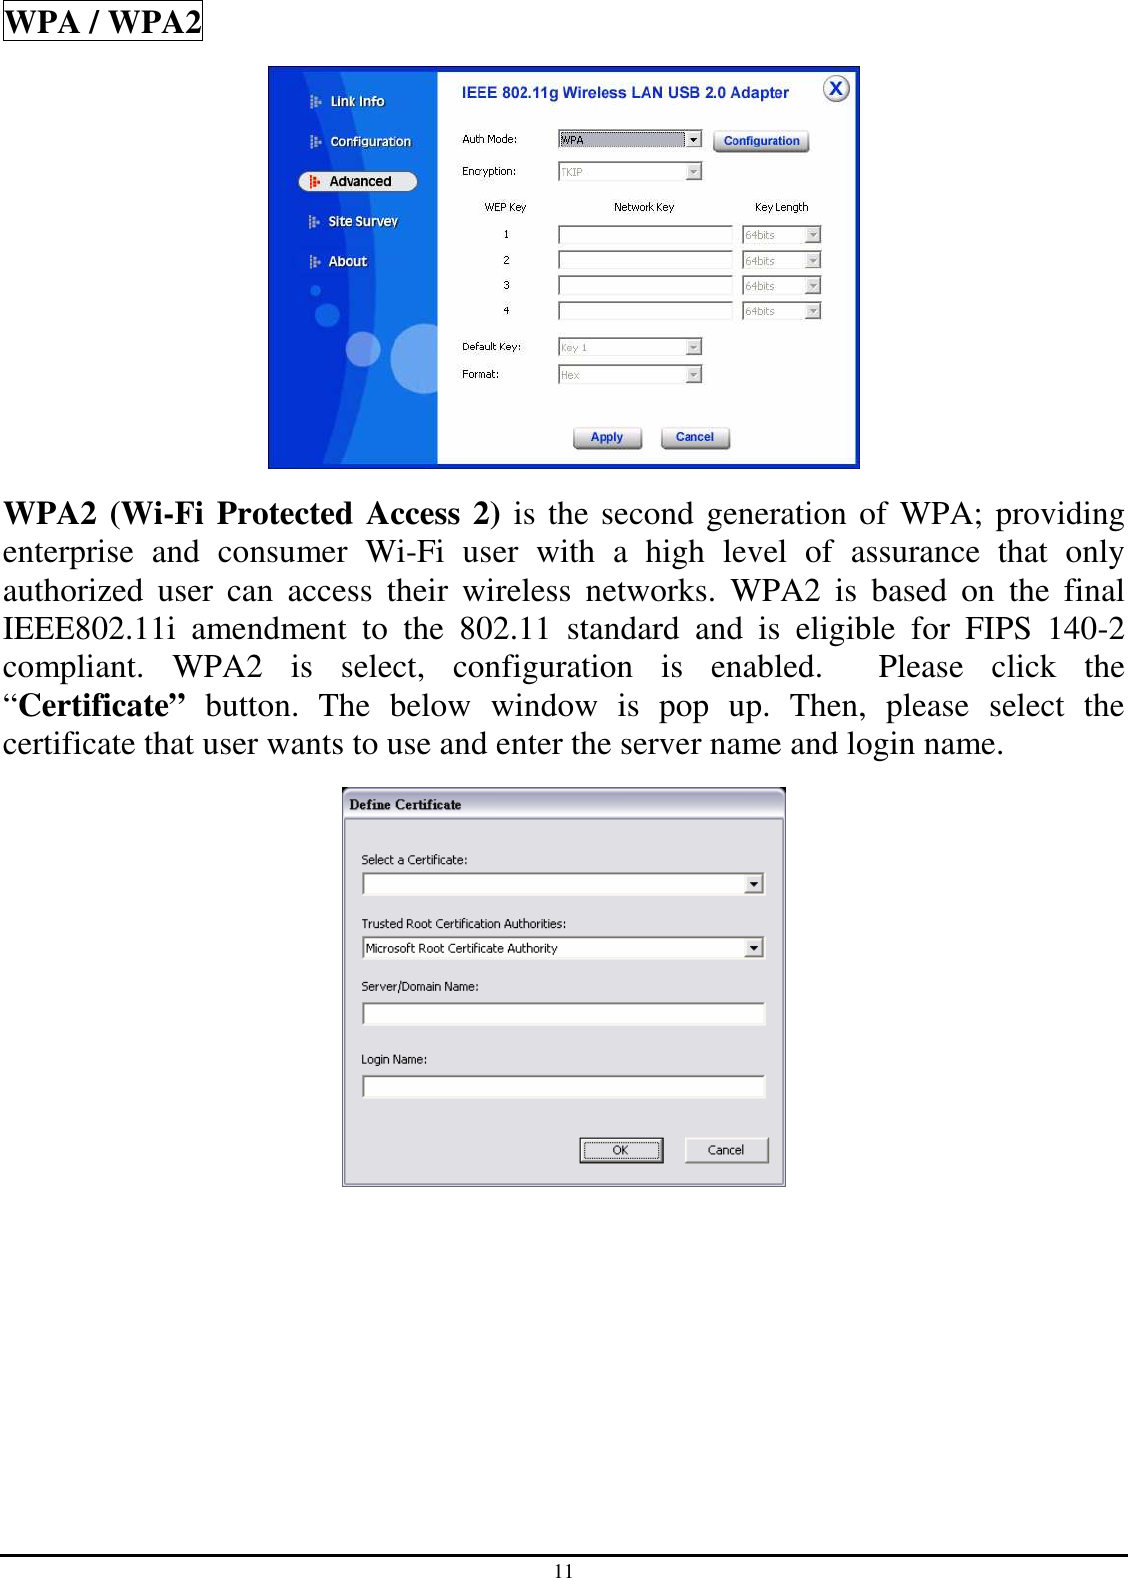 11 WPA / WPA2  WPA2 (Wi-Fi Protected Access 2) is the second generation of WPA; providing enterprise  and  consumer  Wi-Fi  user  with  a  high  level  of  assurance  that  only authorized  user  can  access  their  wireless  networks.  WPA2  is  based  on  the  final IEEE802.11i  amendment  to  the  802.11  standard  and  is  eligible  for  FIPS  140-2 compliant.  WPA2  is  select,  configuration  is  enabled.    Please  click  the “Certificate”  button.  The  below  window  is  pop  up.  Then,  please  select  the certificate that user wants to use and enter the server name and login name.  